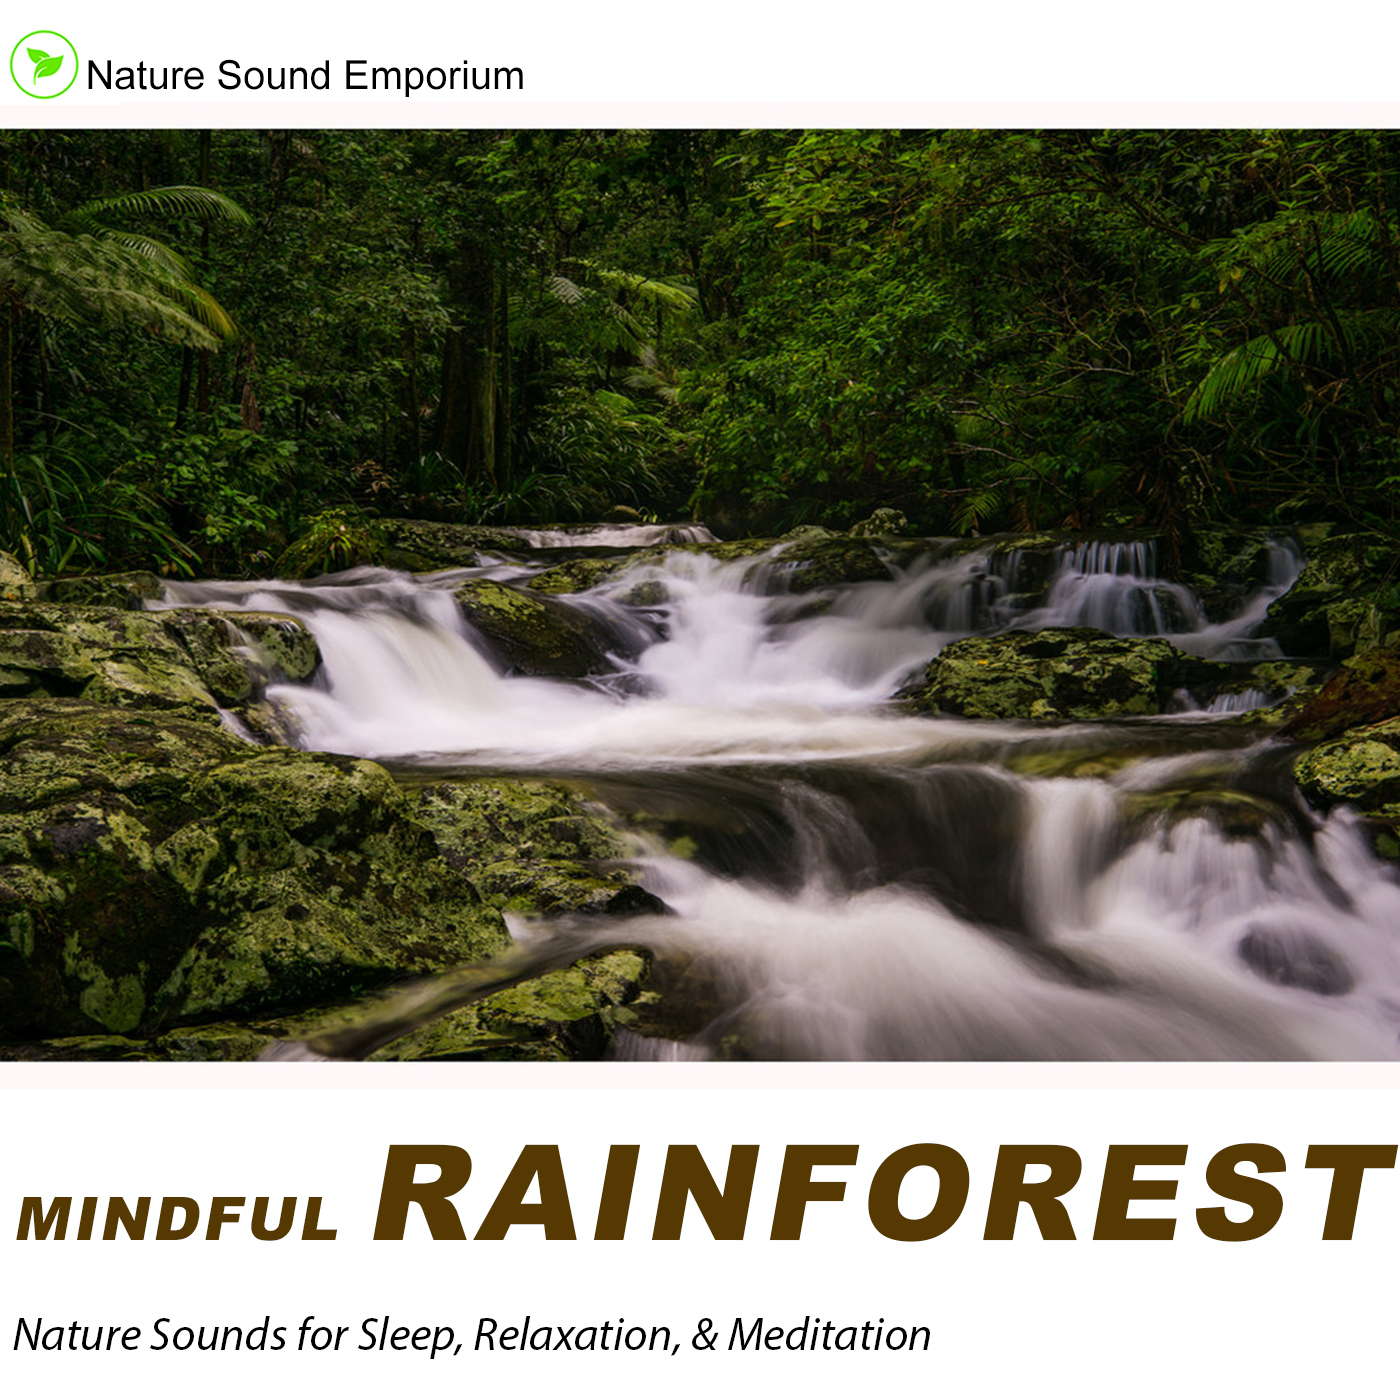 Mindful Rainforest - Nature Sounds for Relaxation, Meditation, Studying & Deep Sleep- Part 1